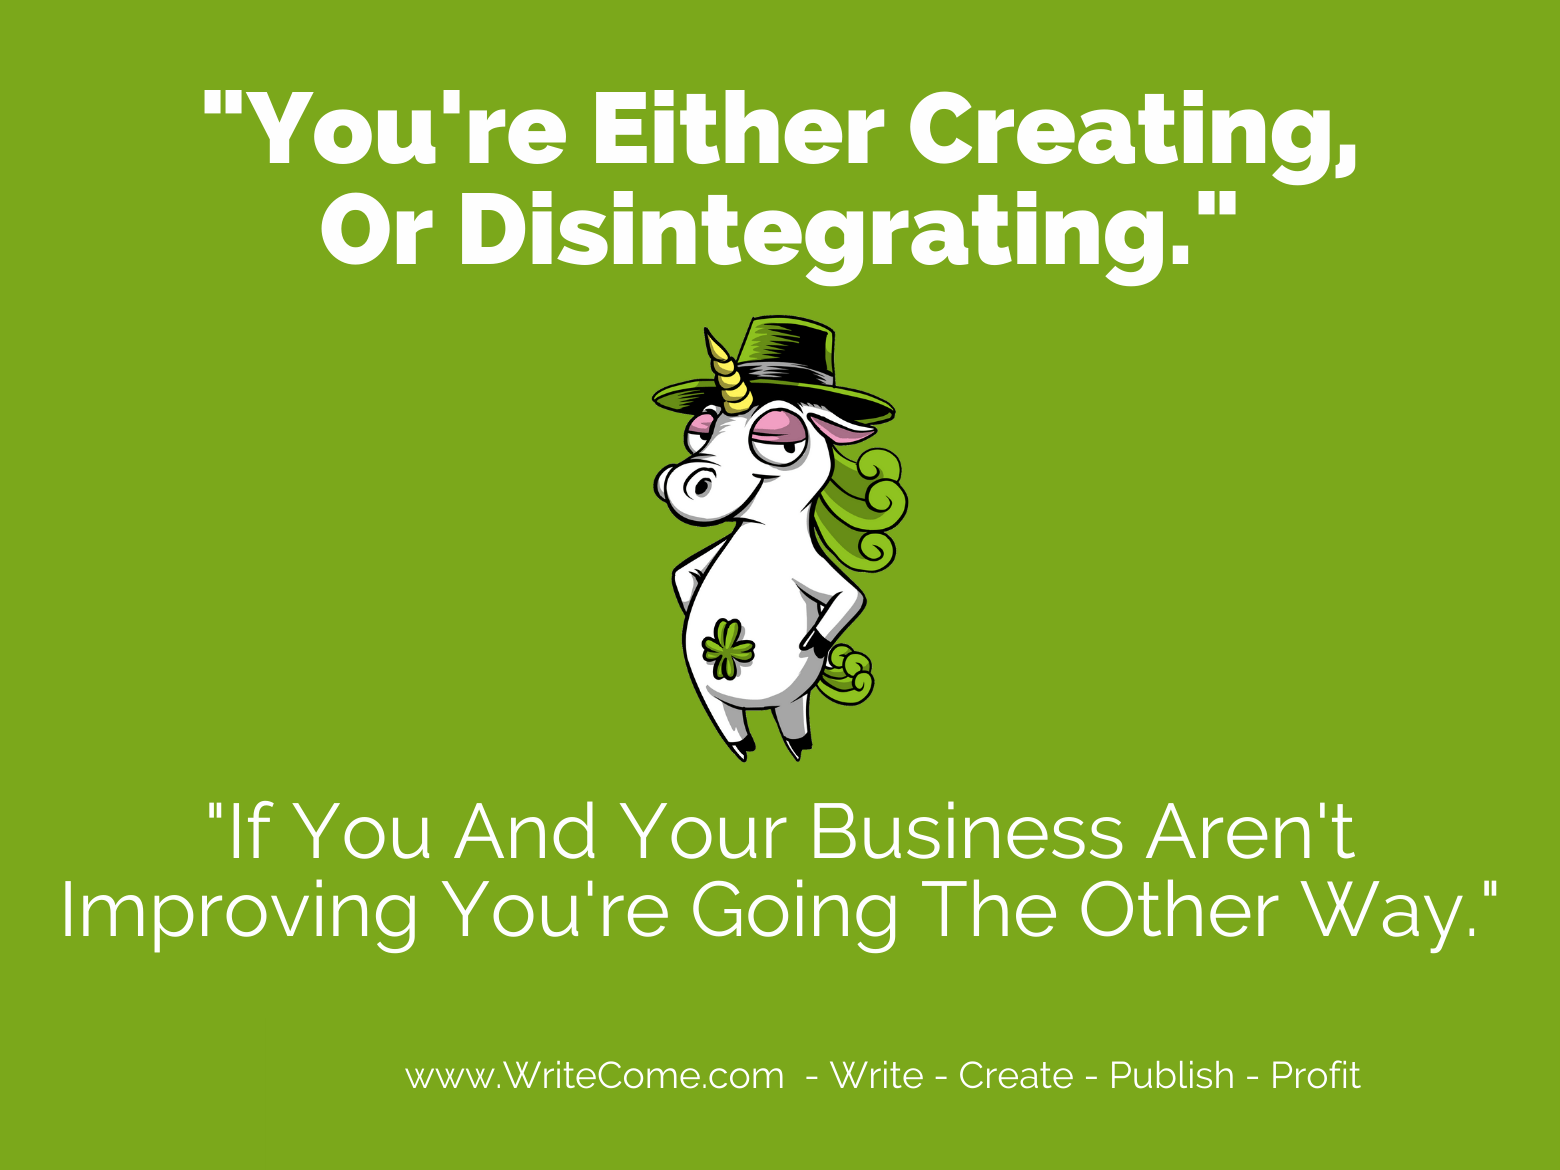 You're either creating, or disintegrating. 